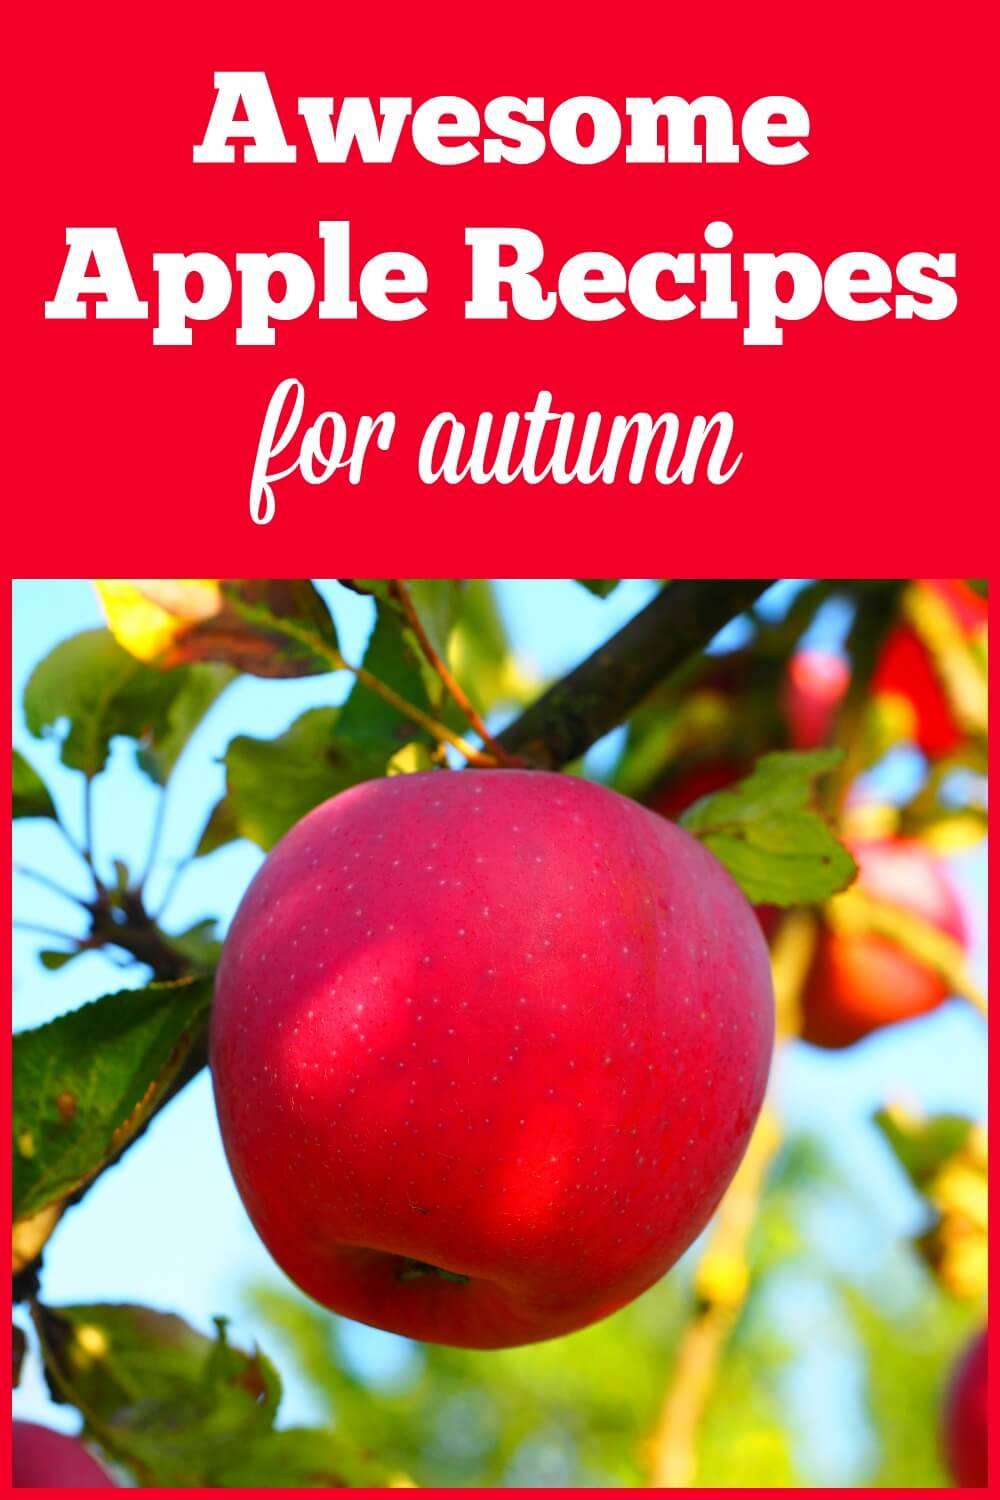 Pumpkin might be the reigning king of autumn right now, but there are some pretty amazing apple recipes out there, too! Check out my top 10.